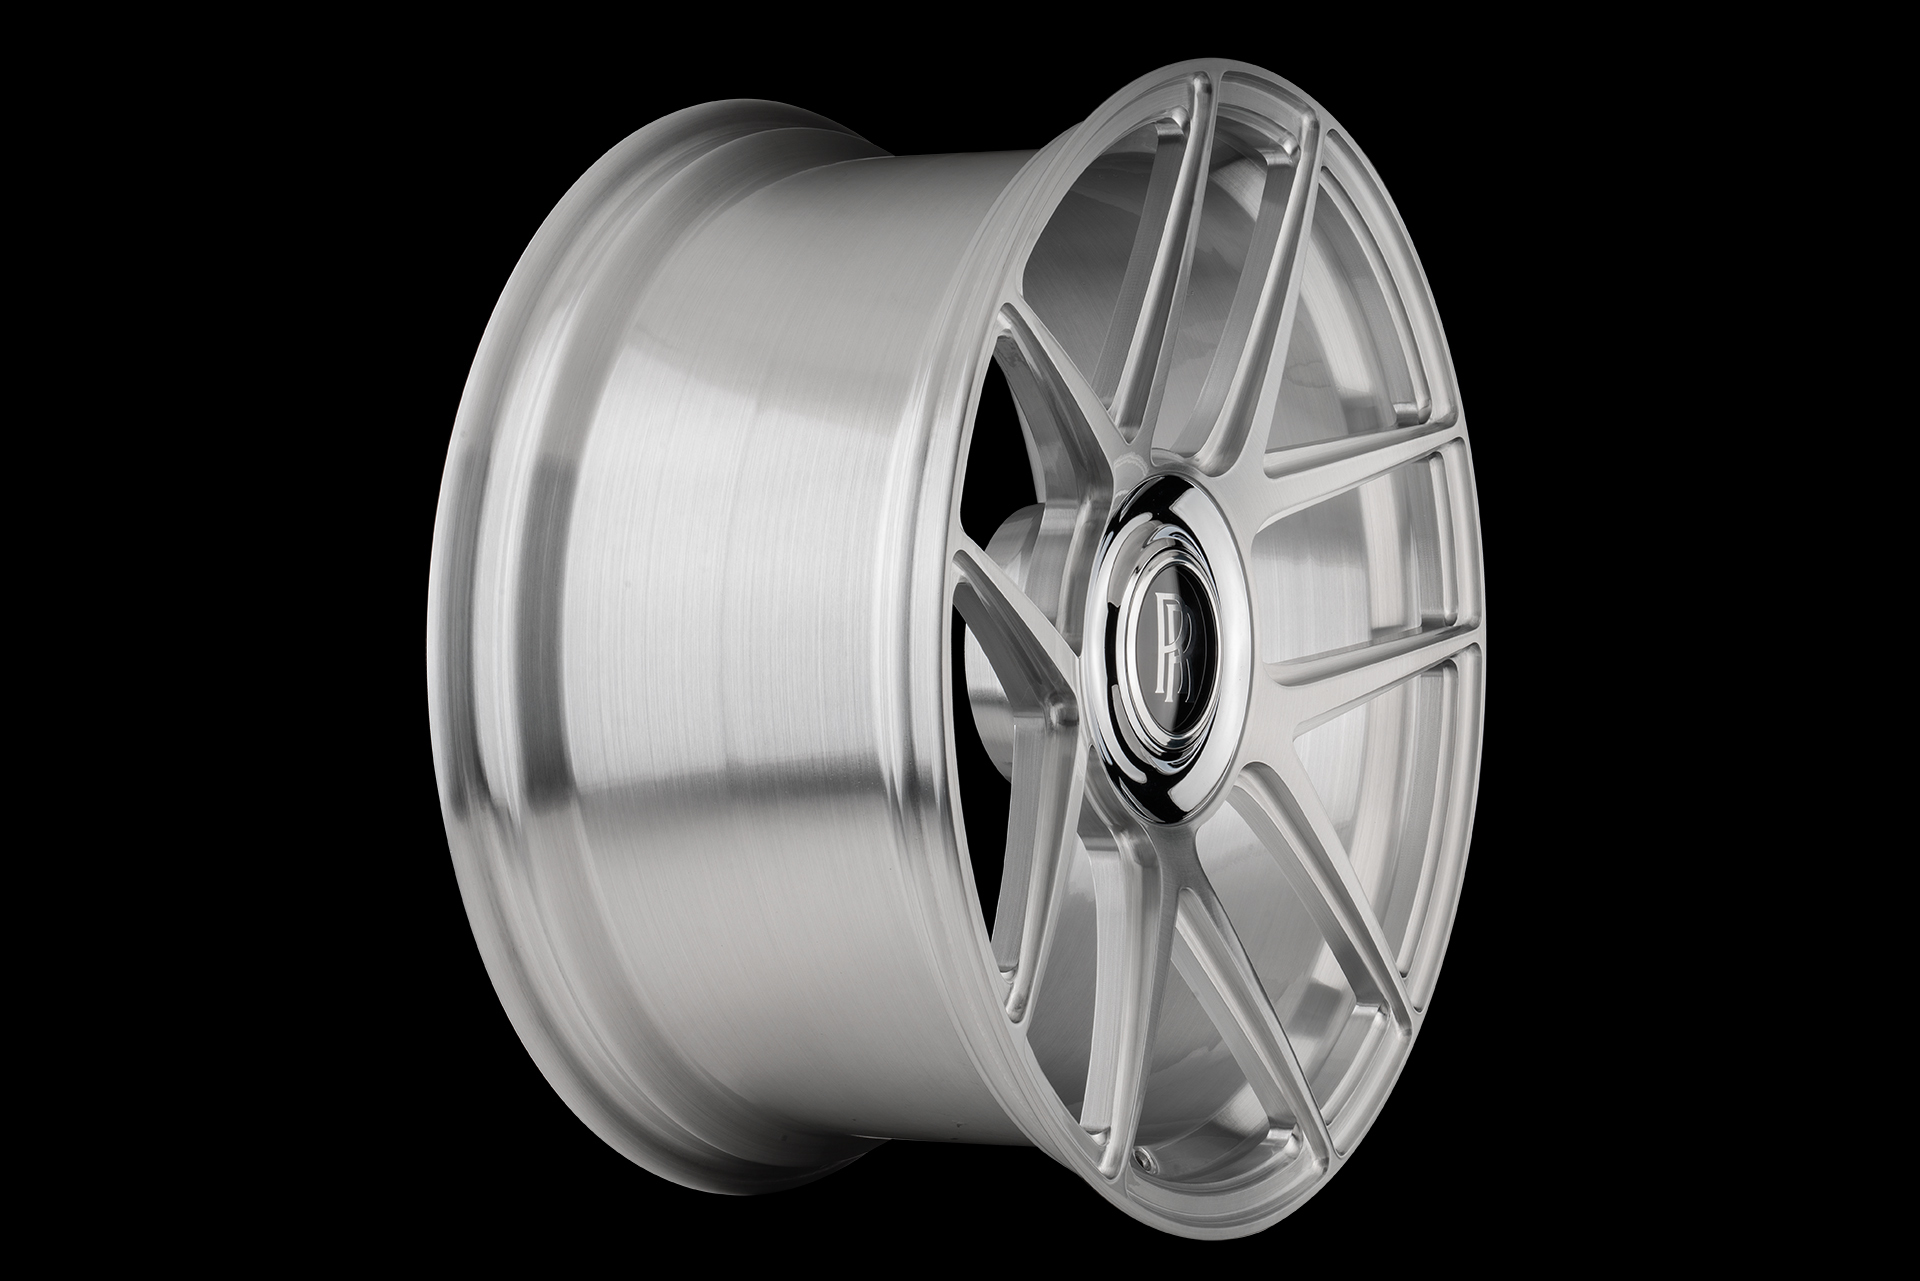 Modulare B18RR forged wheels